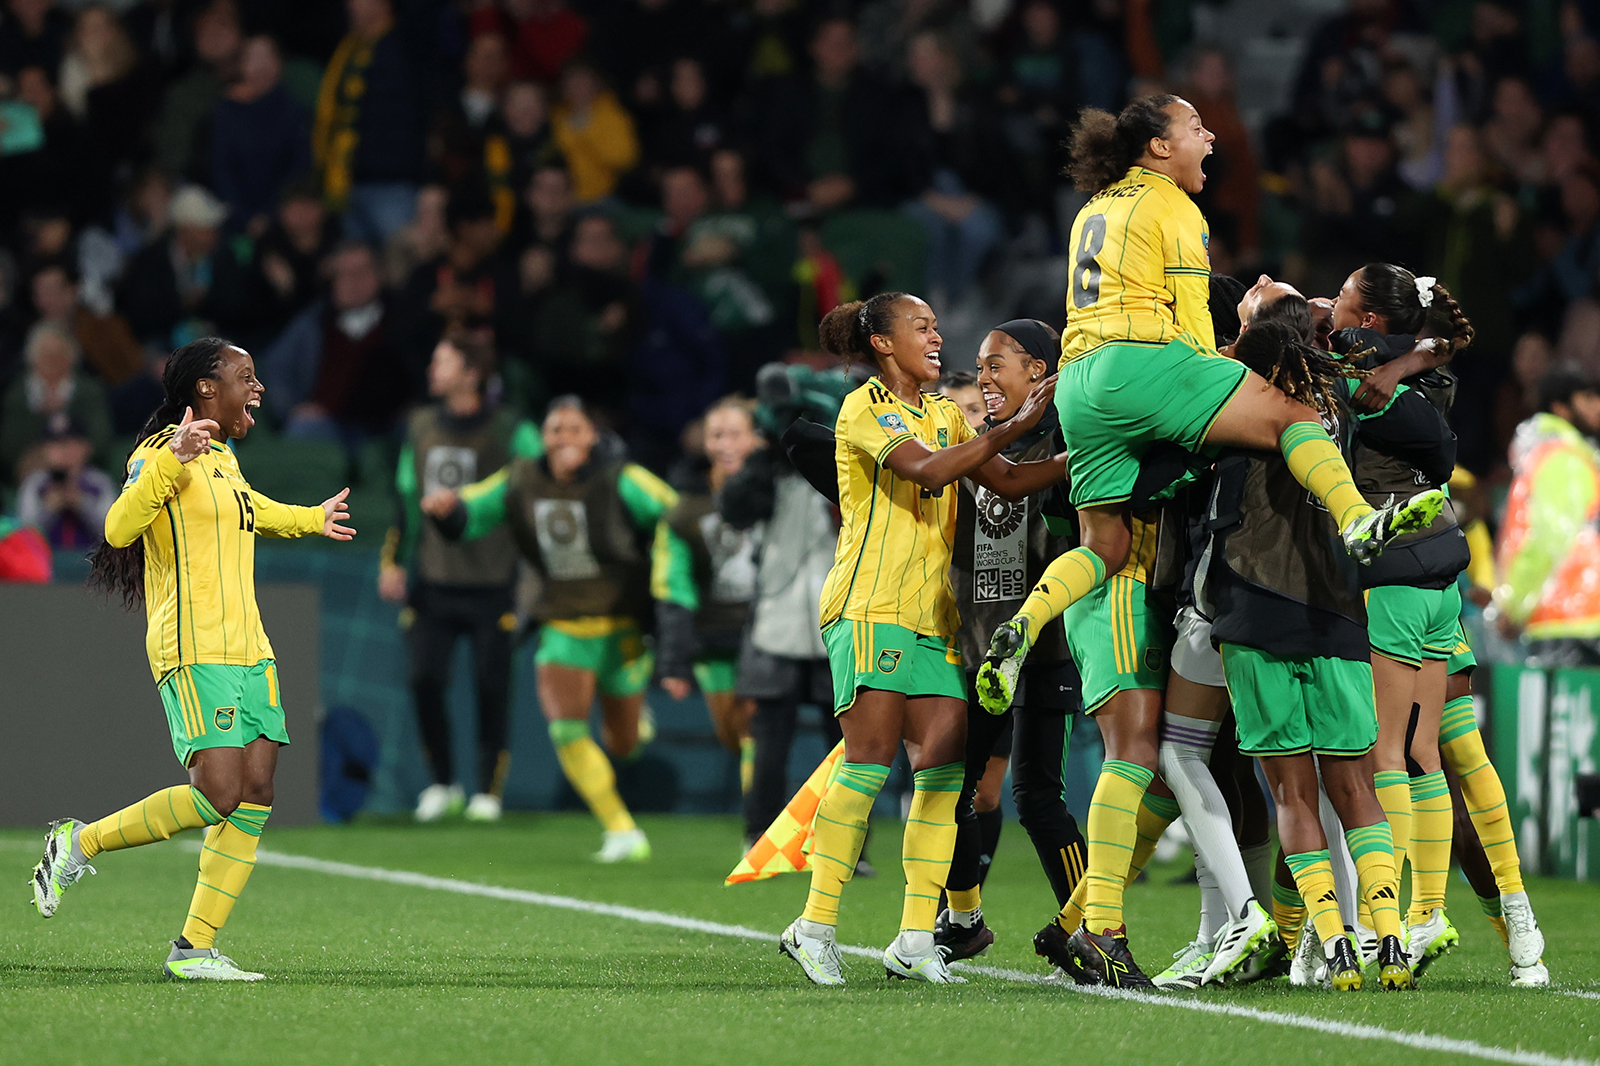 Jamaica players celebrate the team's first goal from Allyson Swaby during the match against Panama in Perth, Australia on July 29.